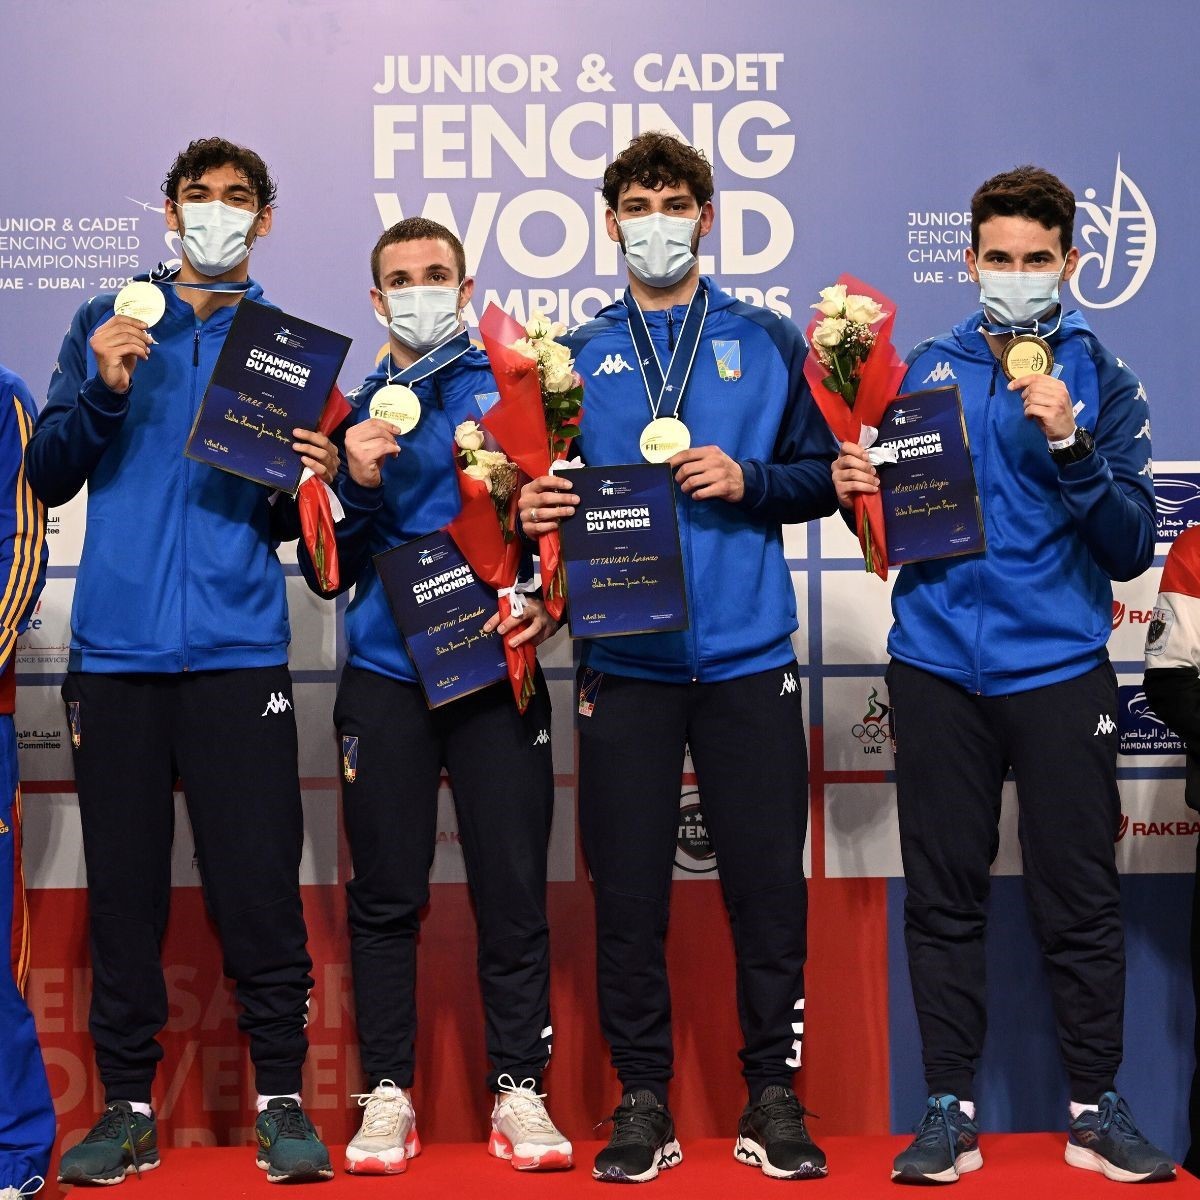 Italy and France take team sabre titles as Junior and Cadet Fencing World Championships continue